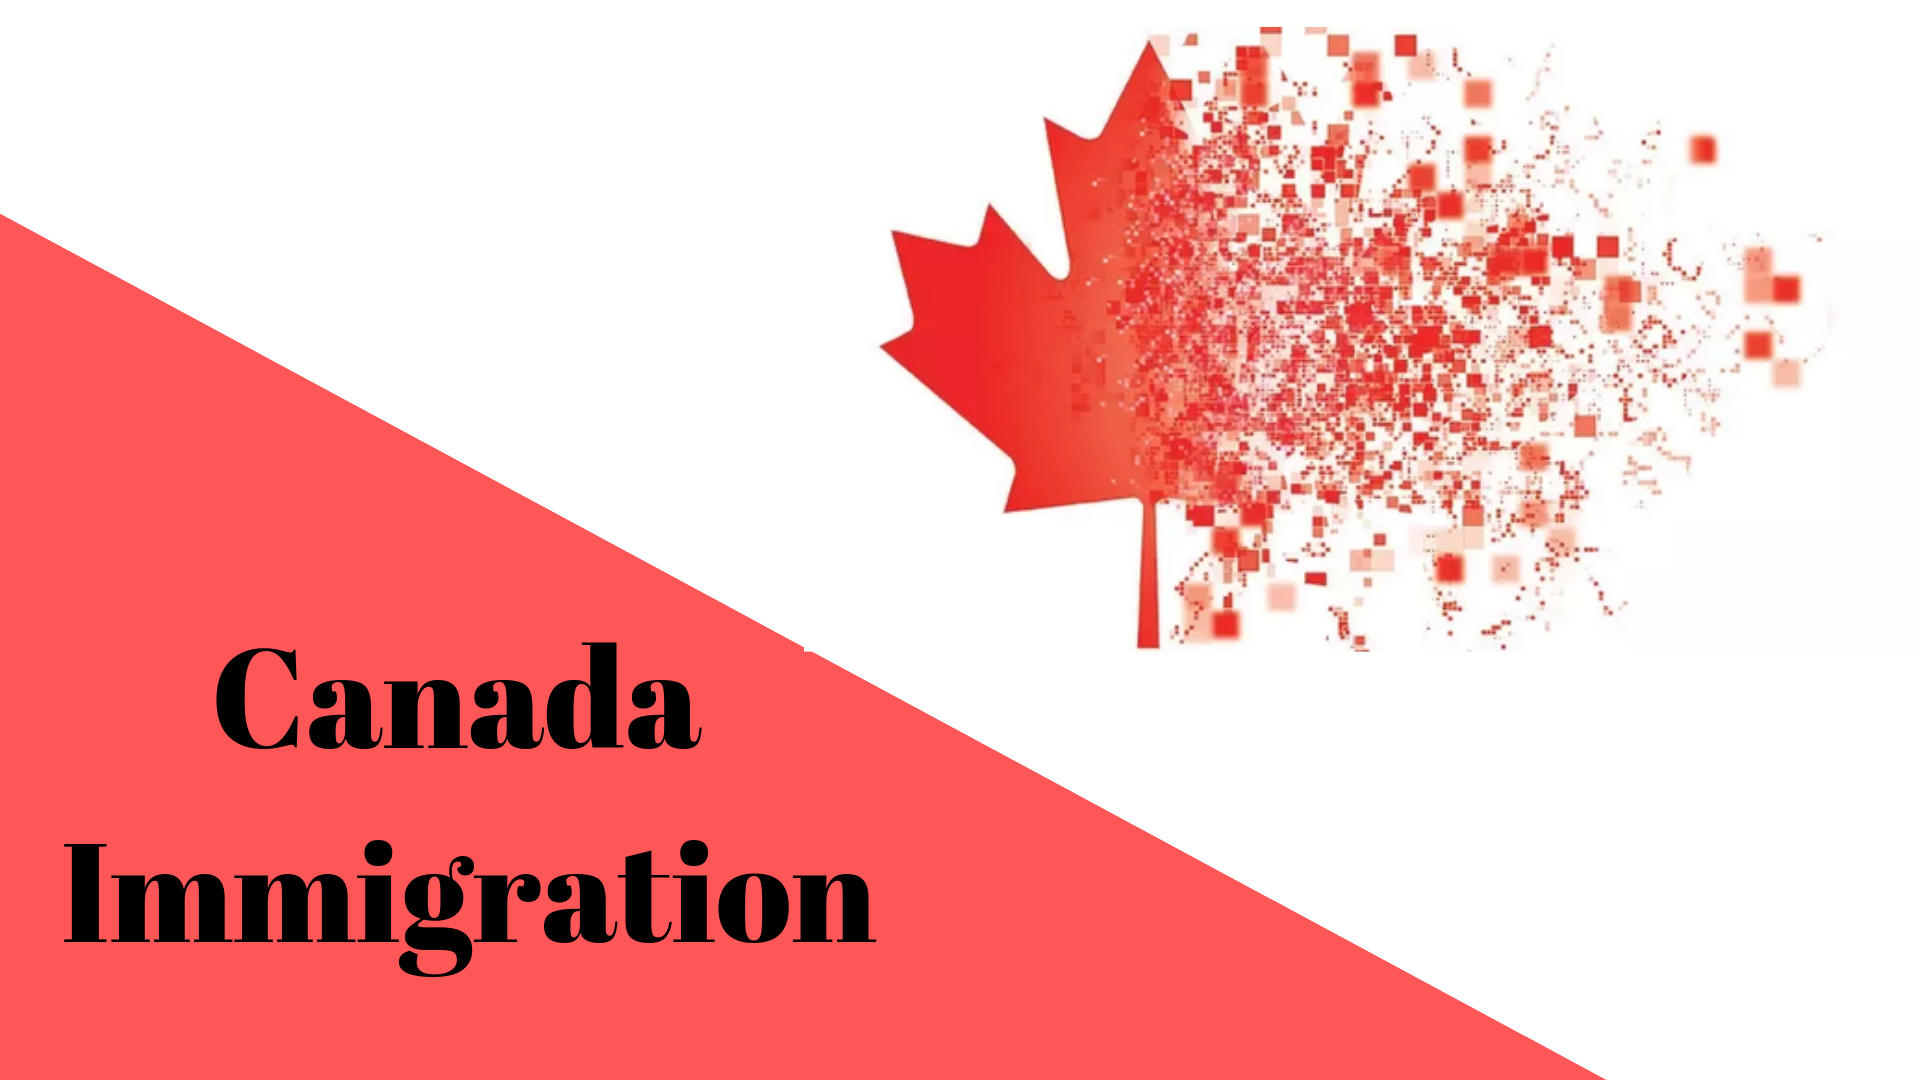 Who are the best immigration consultants for Canada?